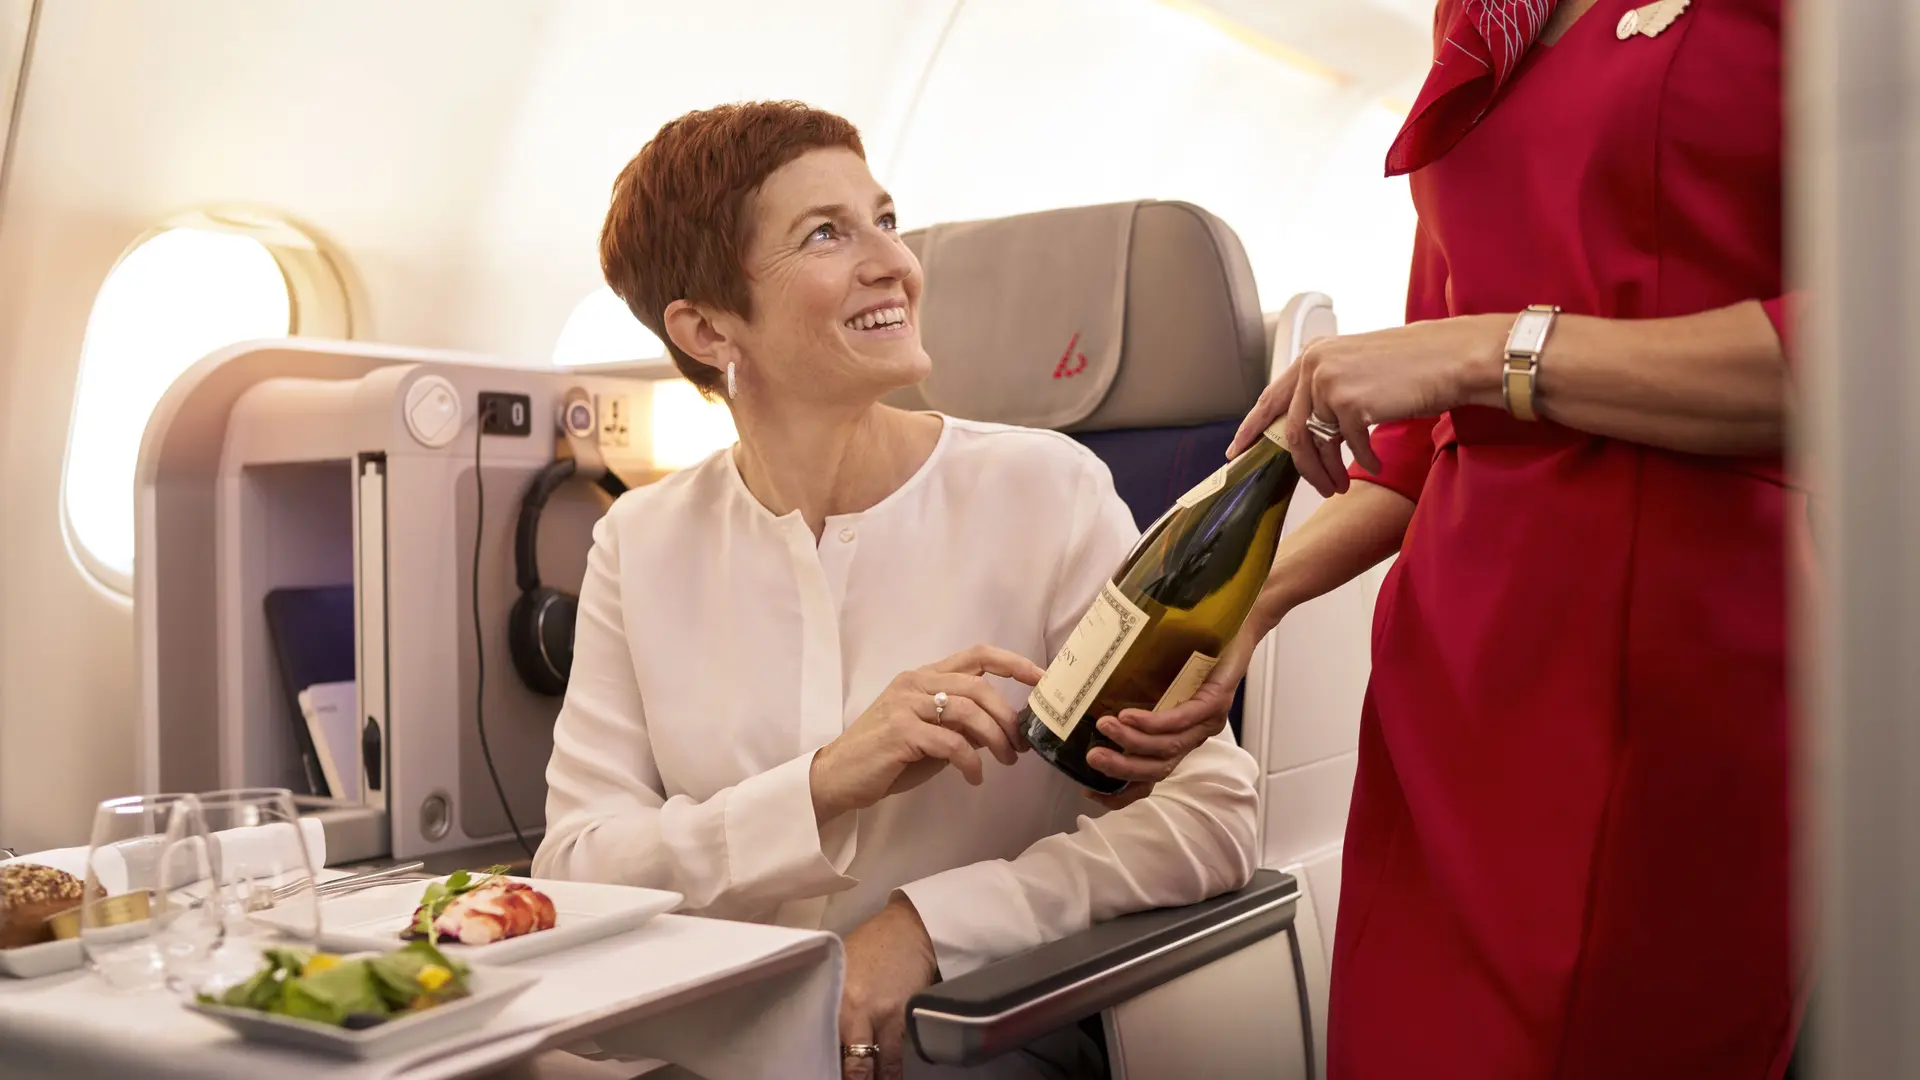 Airline review Beverages - Brussels Airlines - 5